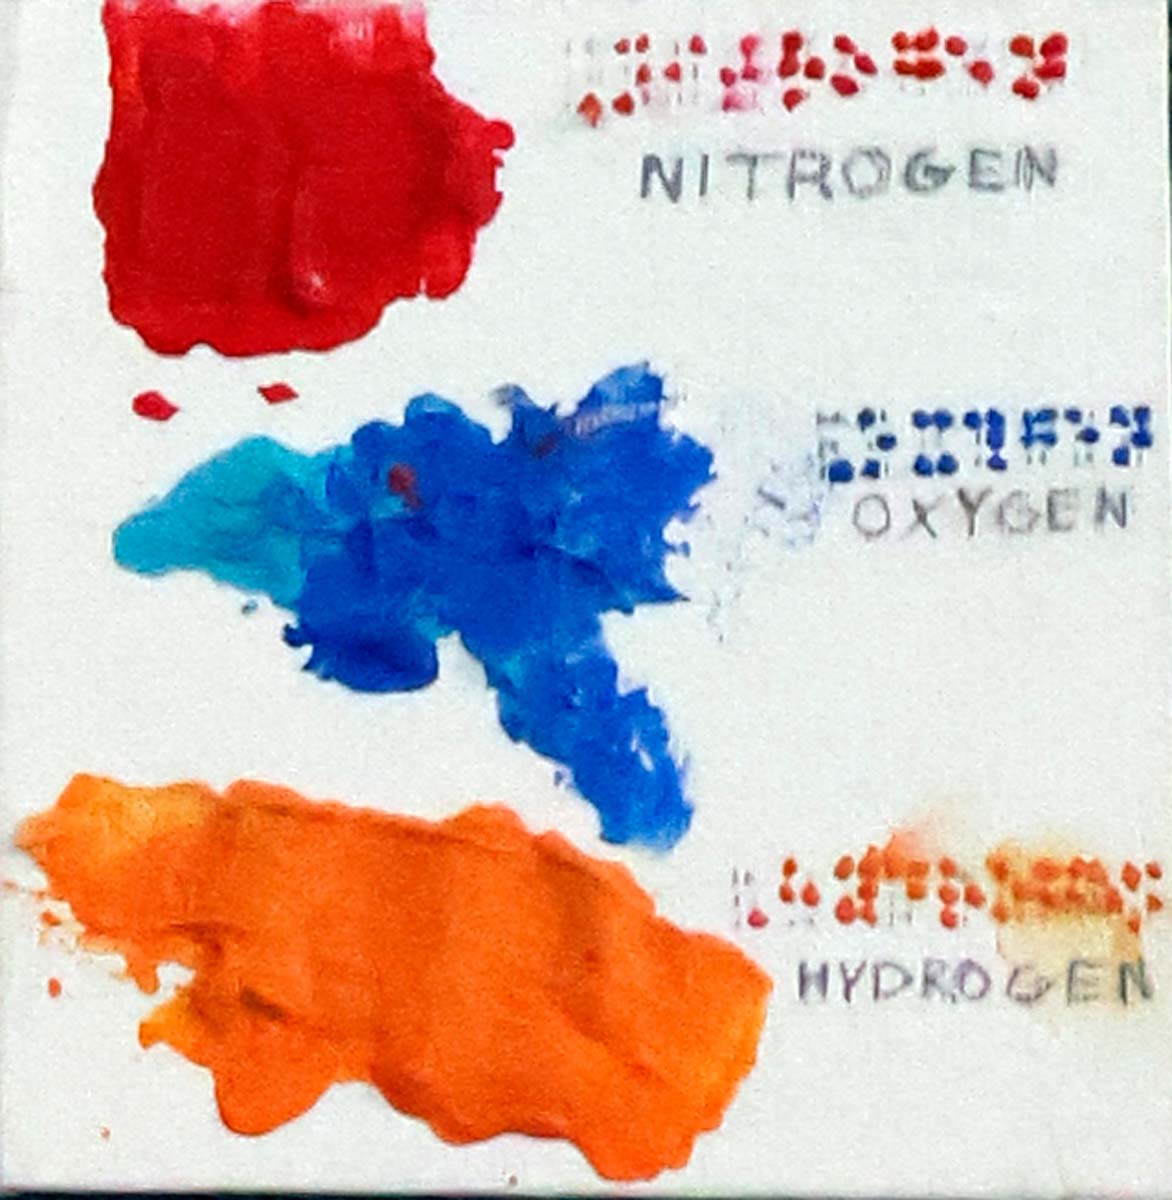 A lagend with braille signage that can be used to read the textured painting, each color and texture represents a different element: Oxygen, Hydrogen, or Nitrogen